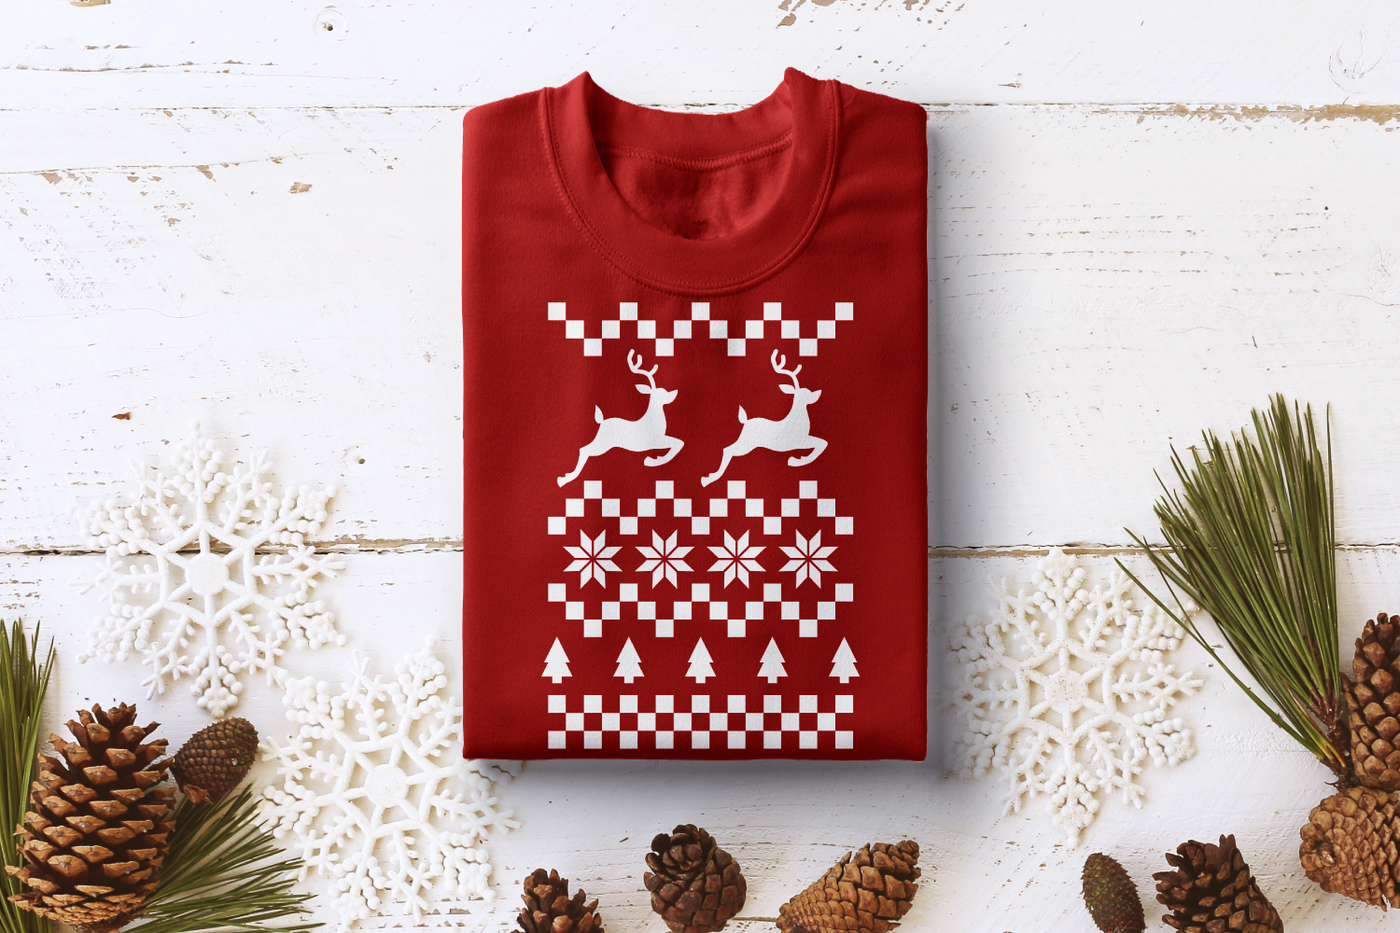 A folded red sweatshirt. On the shirt, done in the style of a Christmas sweater, are a checkerboard pattern, jumping reindeer, trees, and 8-pointed stars shapes.